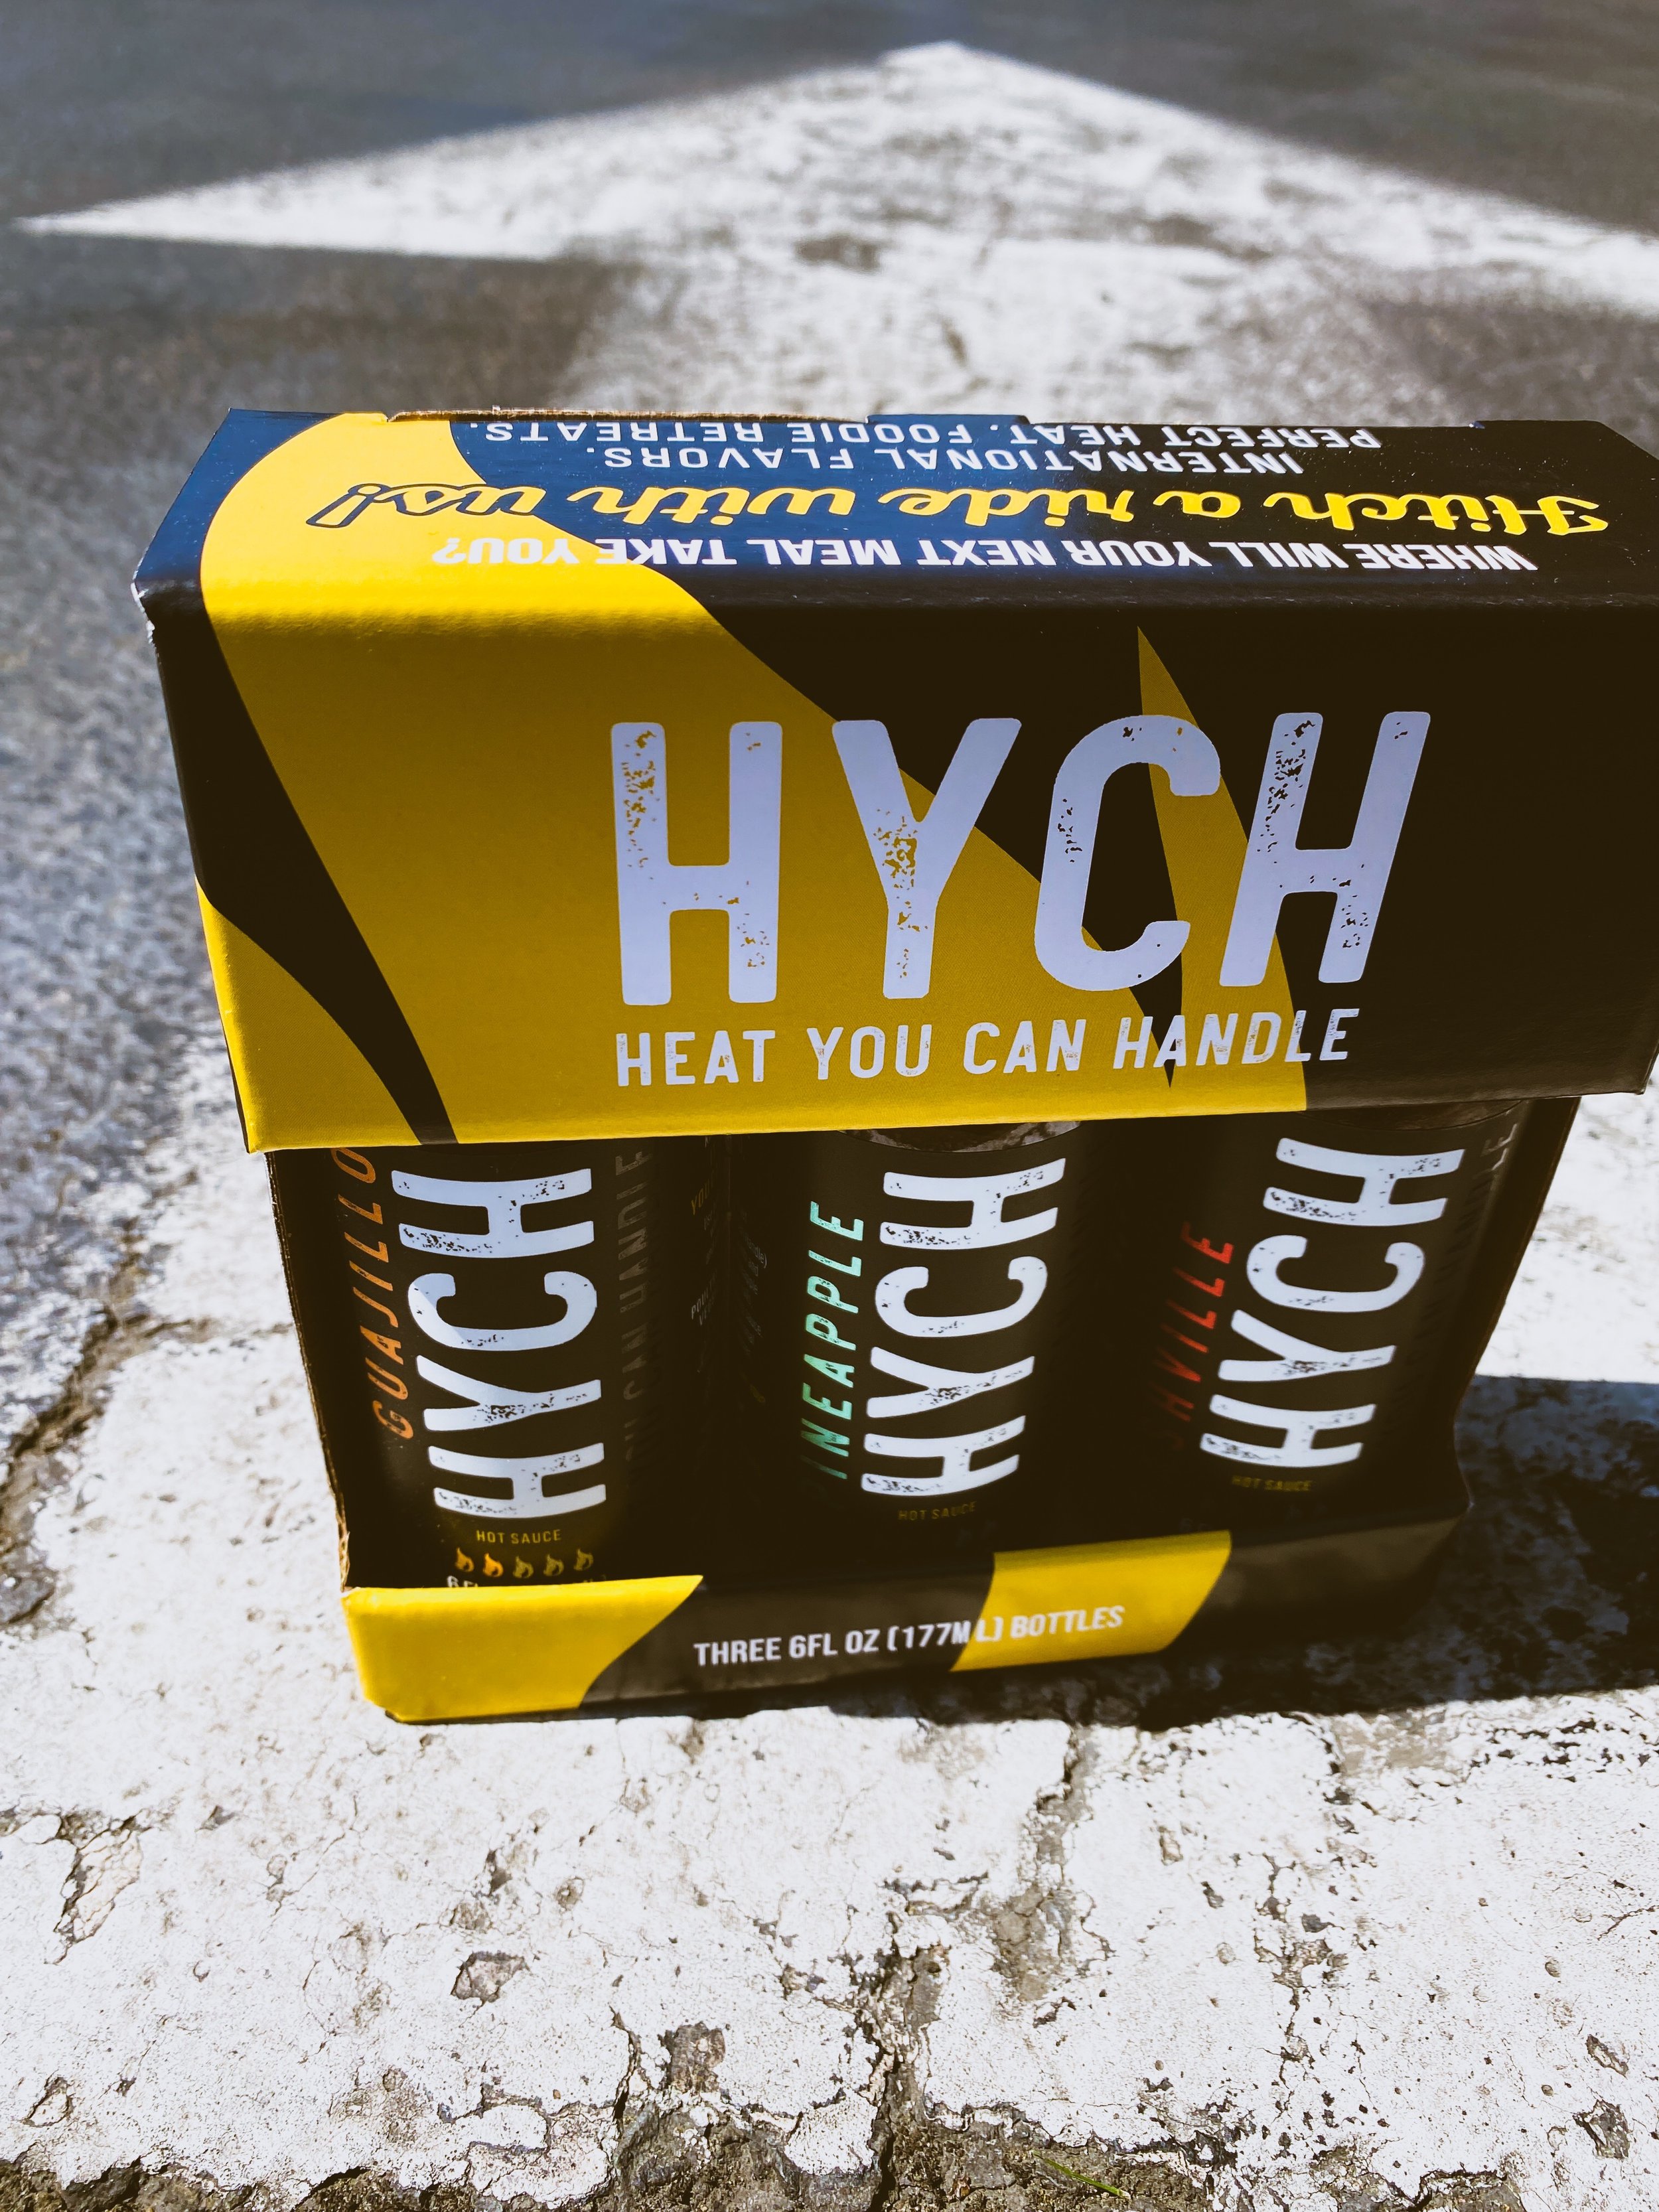 HYCH Gift Pack FRONT Tight.JPG